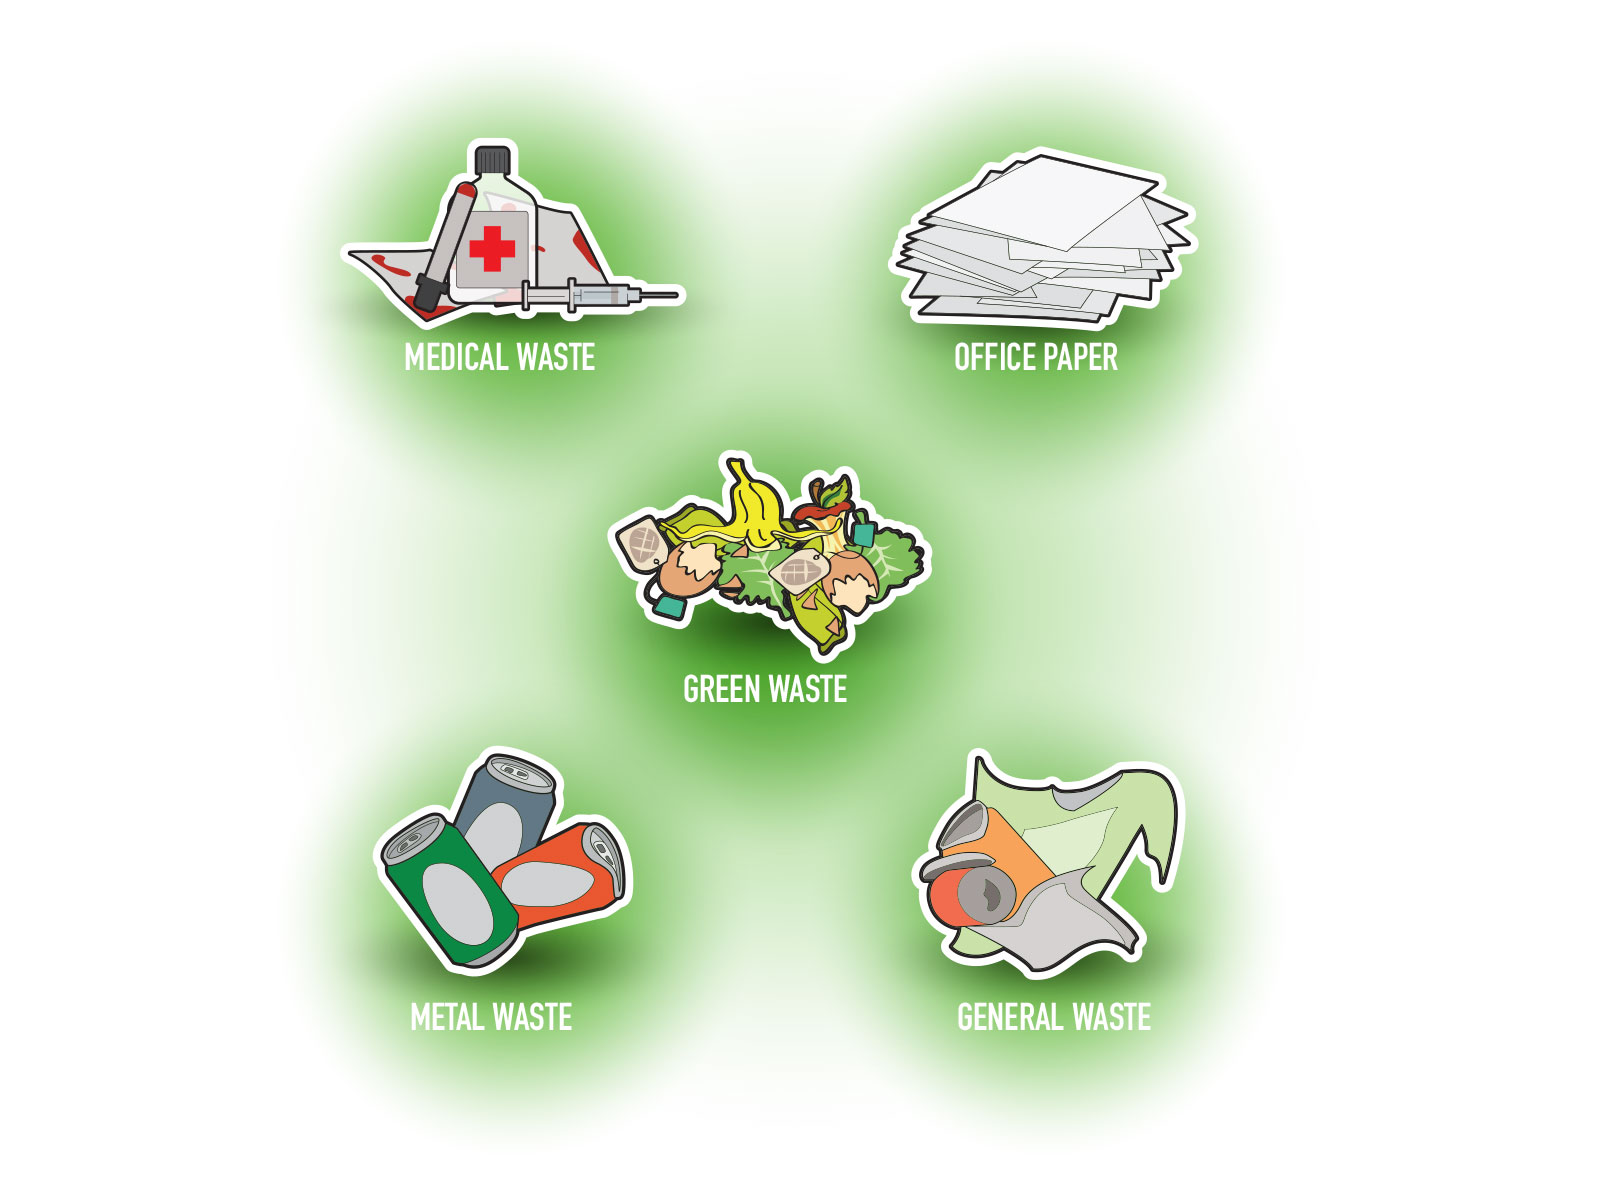 Stylised vector illustration icons of different types of waste